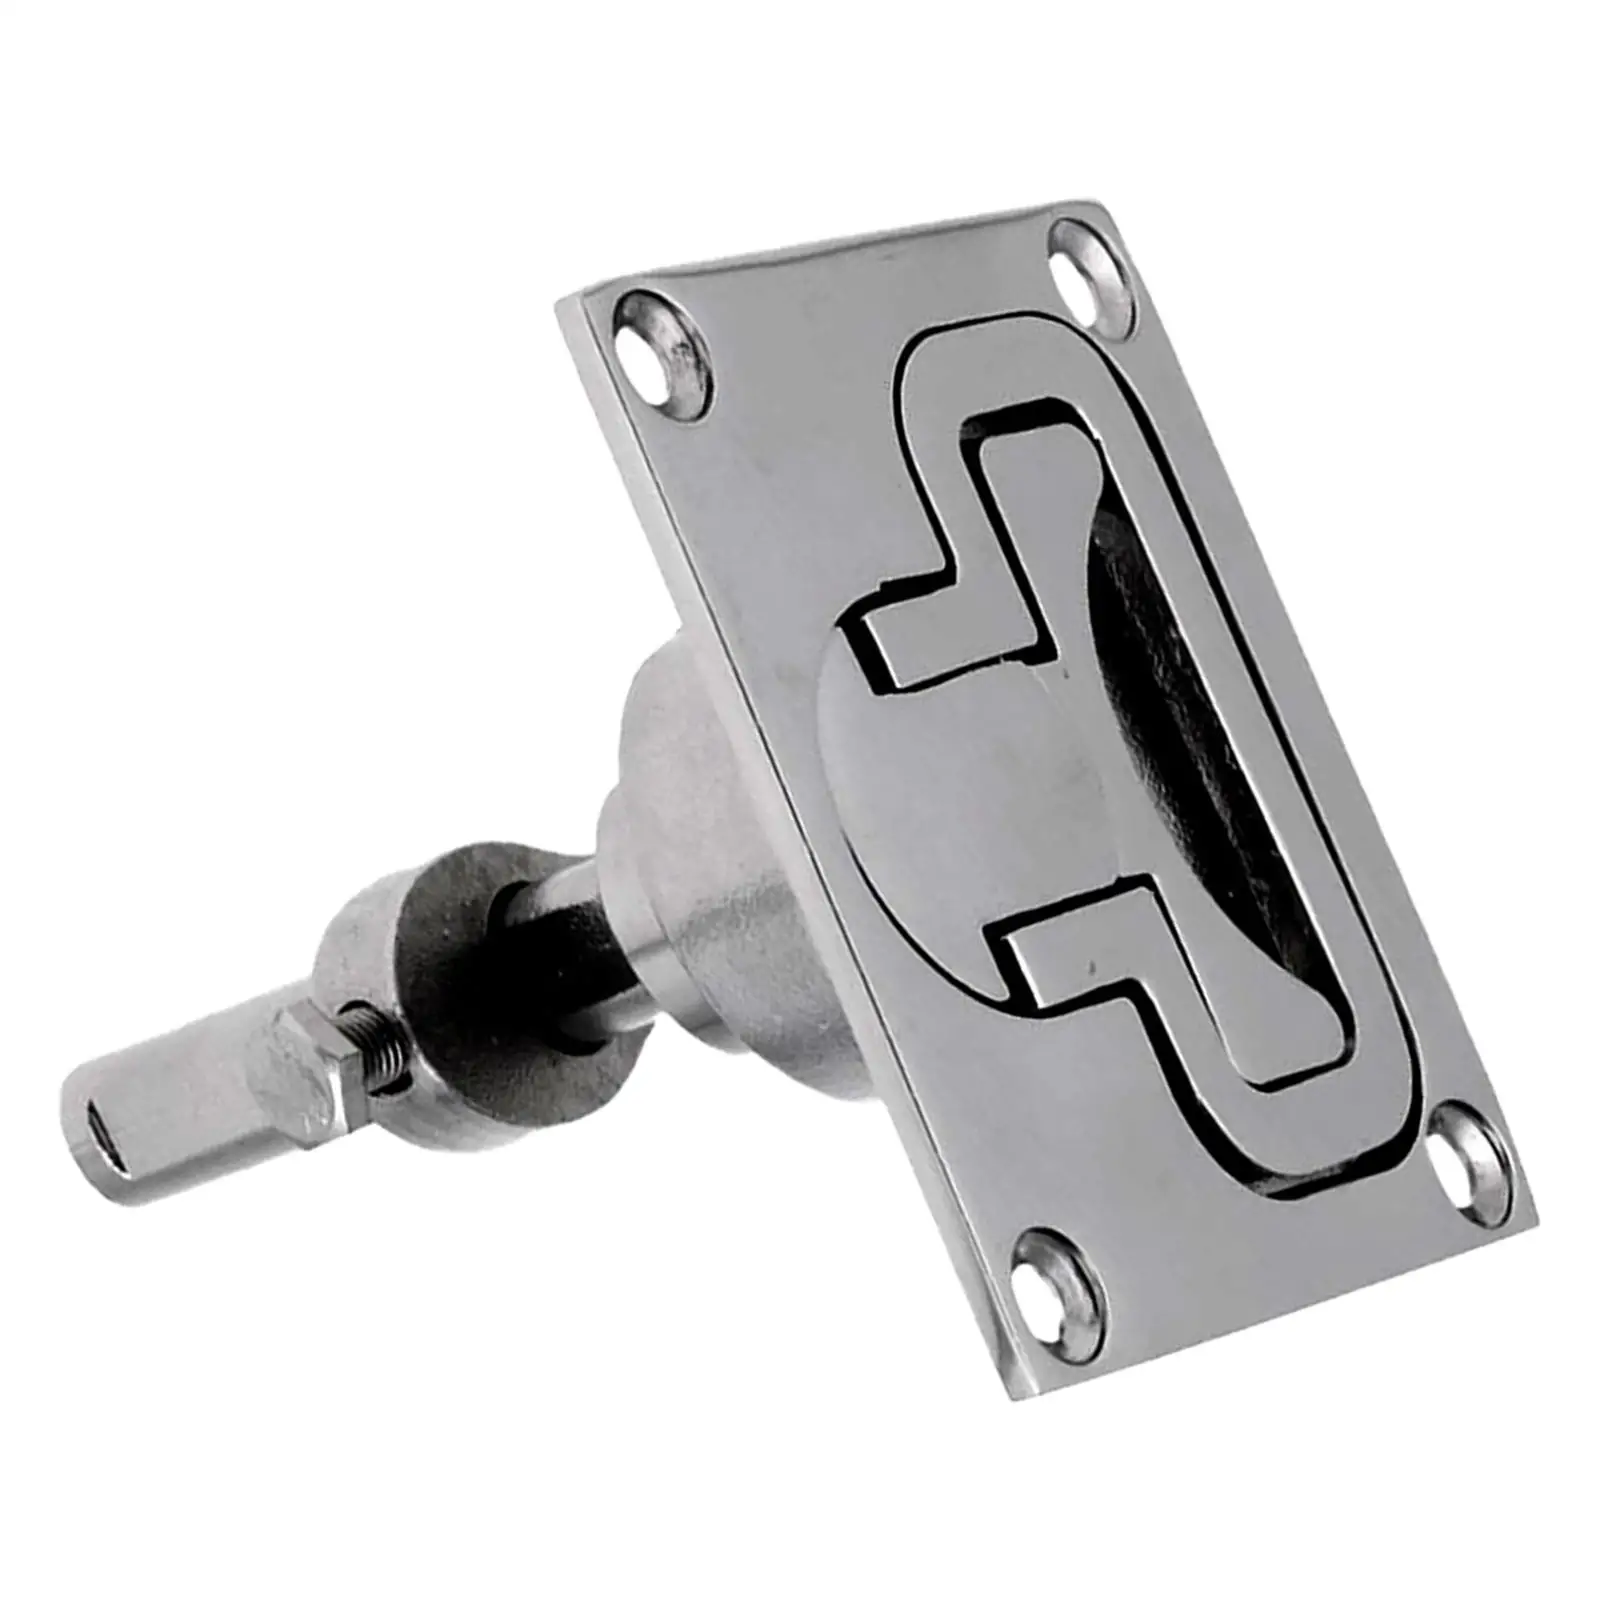 Stainless Steel Boat Floor Buckle Hatch Latch Replaces Polishing Flush Turning Lift Handle Easier to Install Boat Accessories